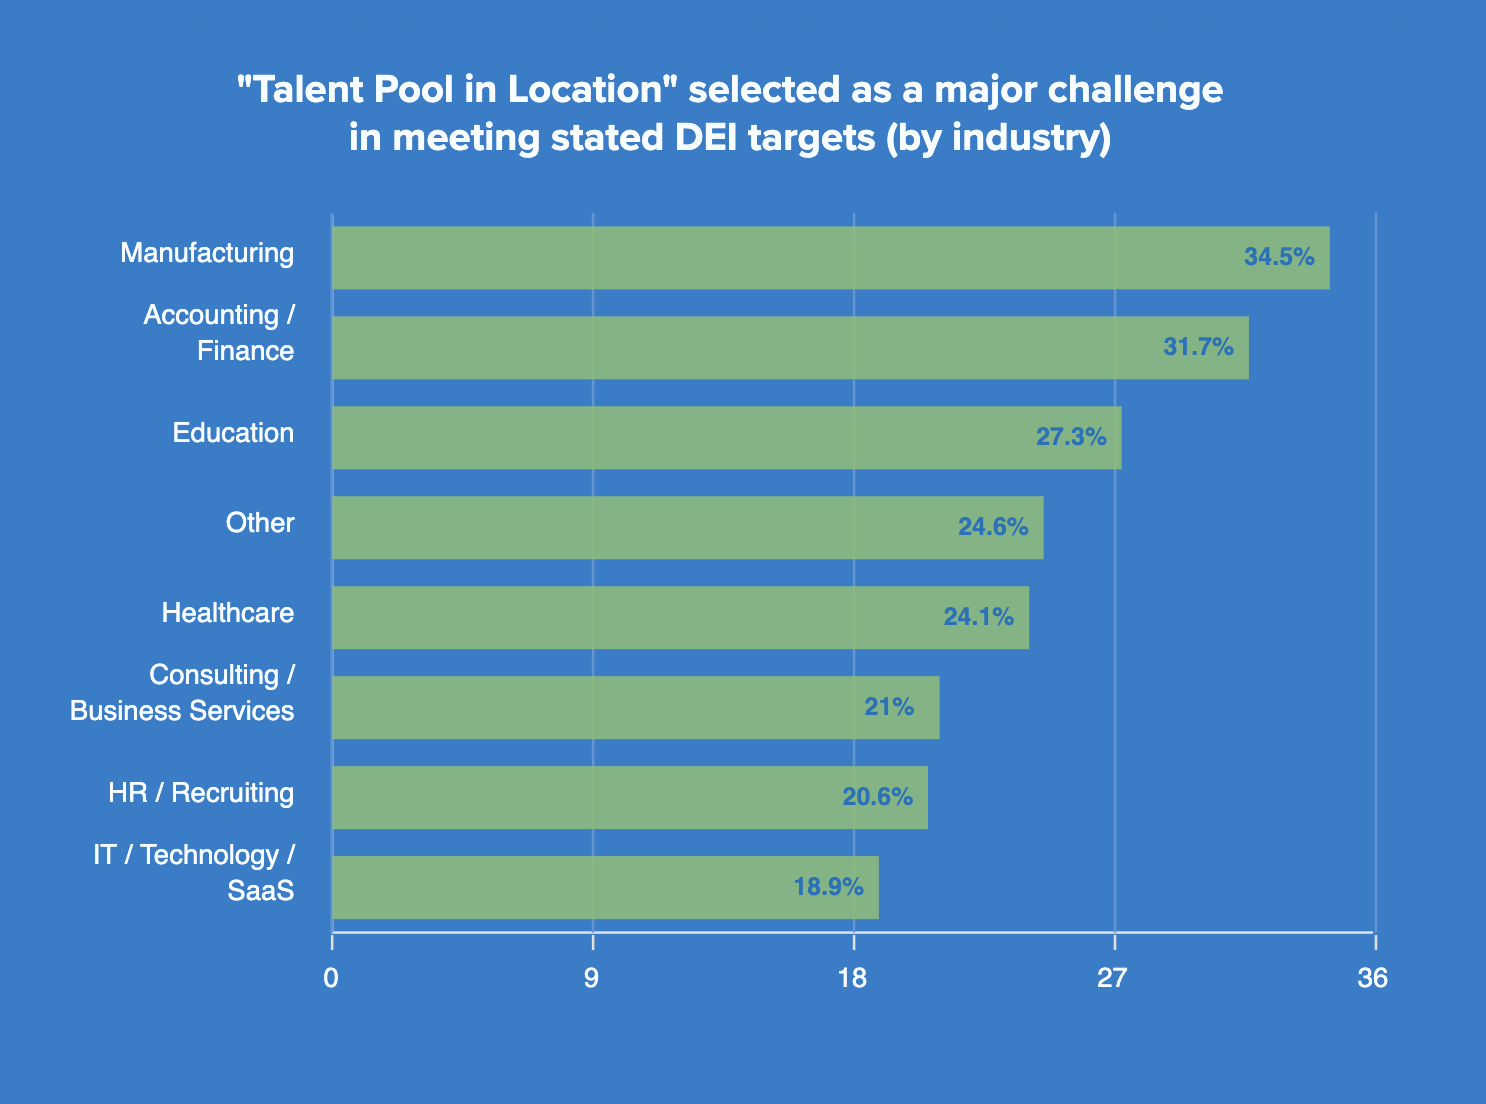 _Talent Pool in Location_ selected as a major challenge in meeting stated DEI targets (by industry)